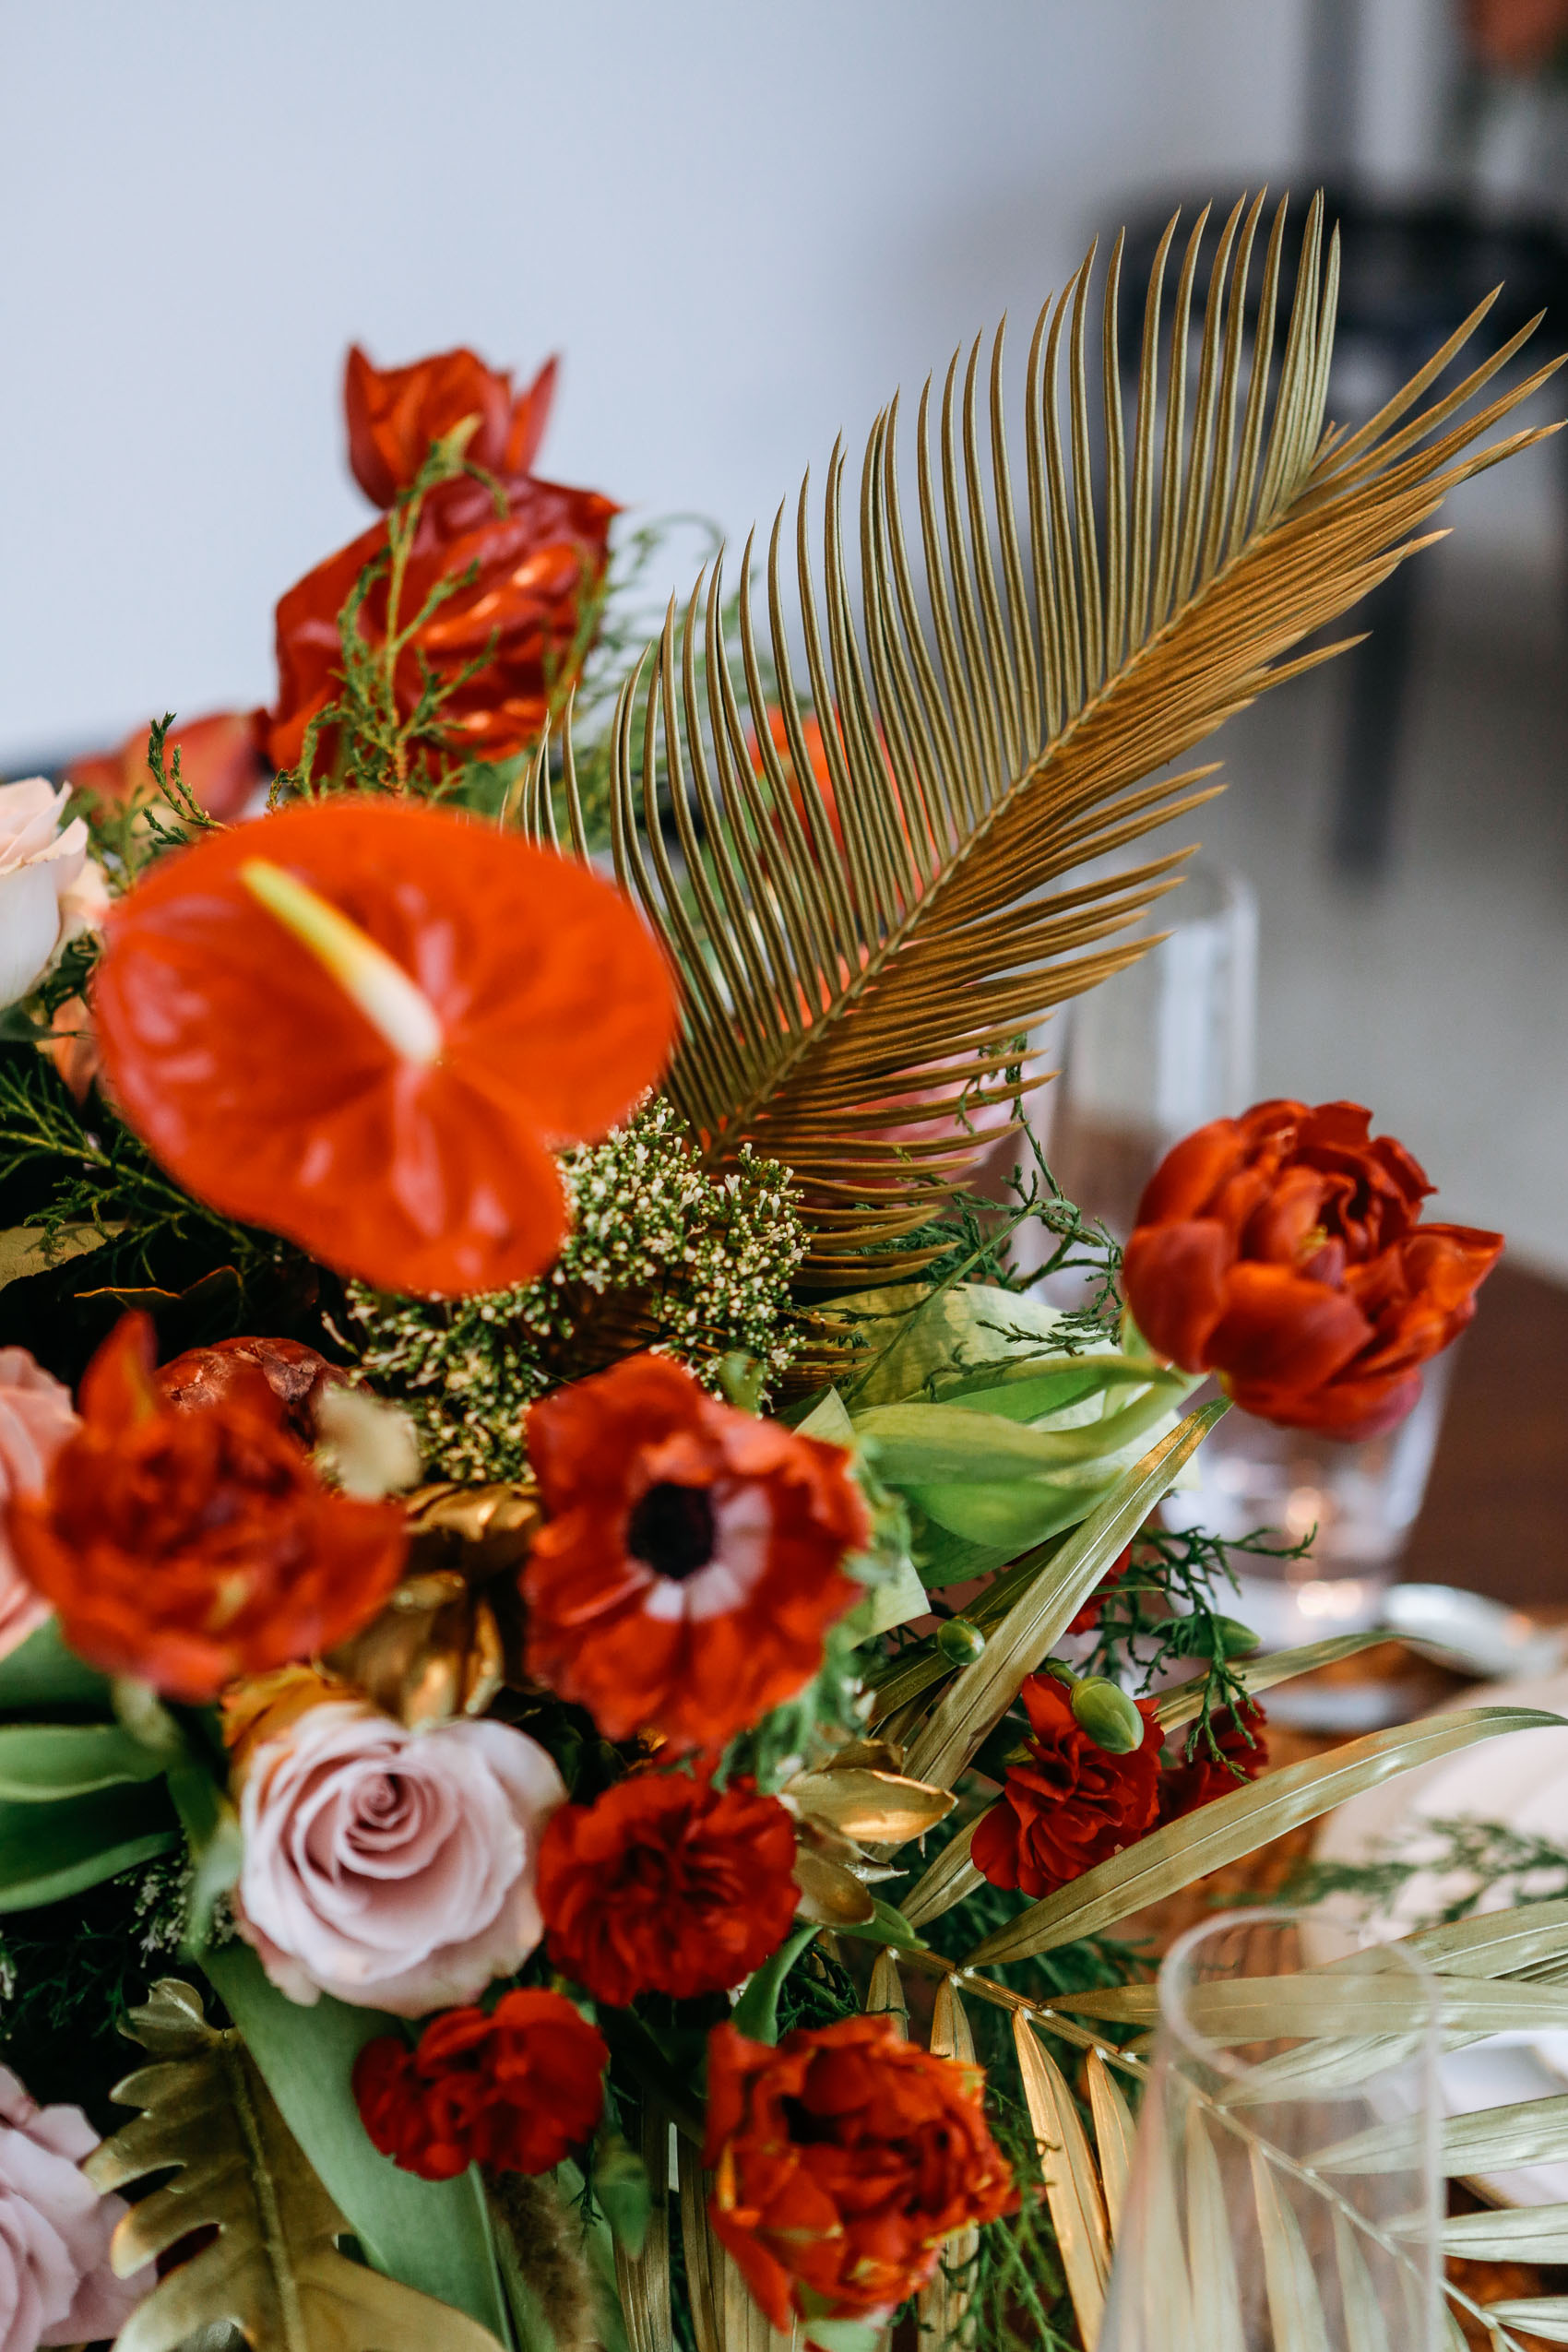 Anthurium, anemone, carnation and gold painted palm leaf flower arrangement by Silvatica Flores